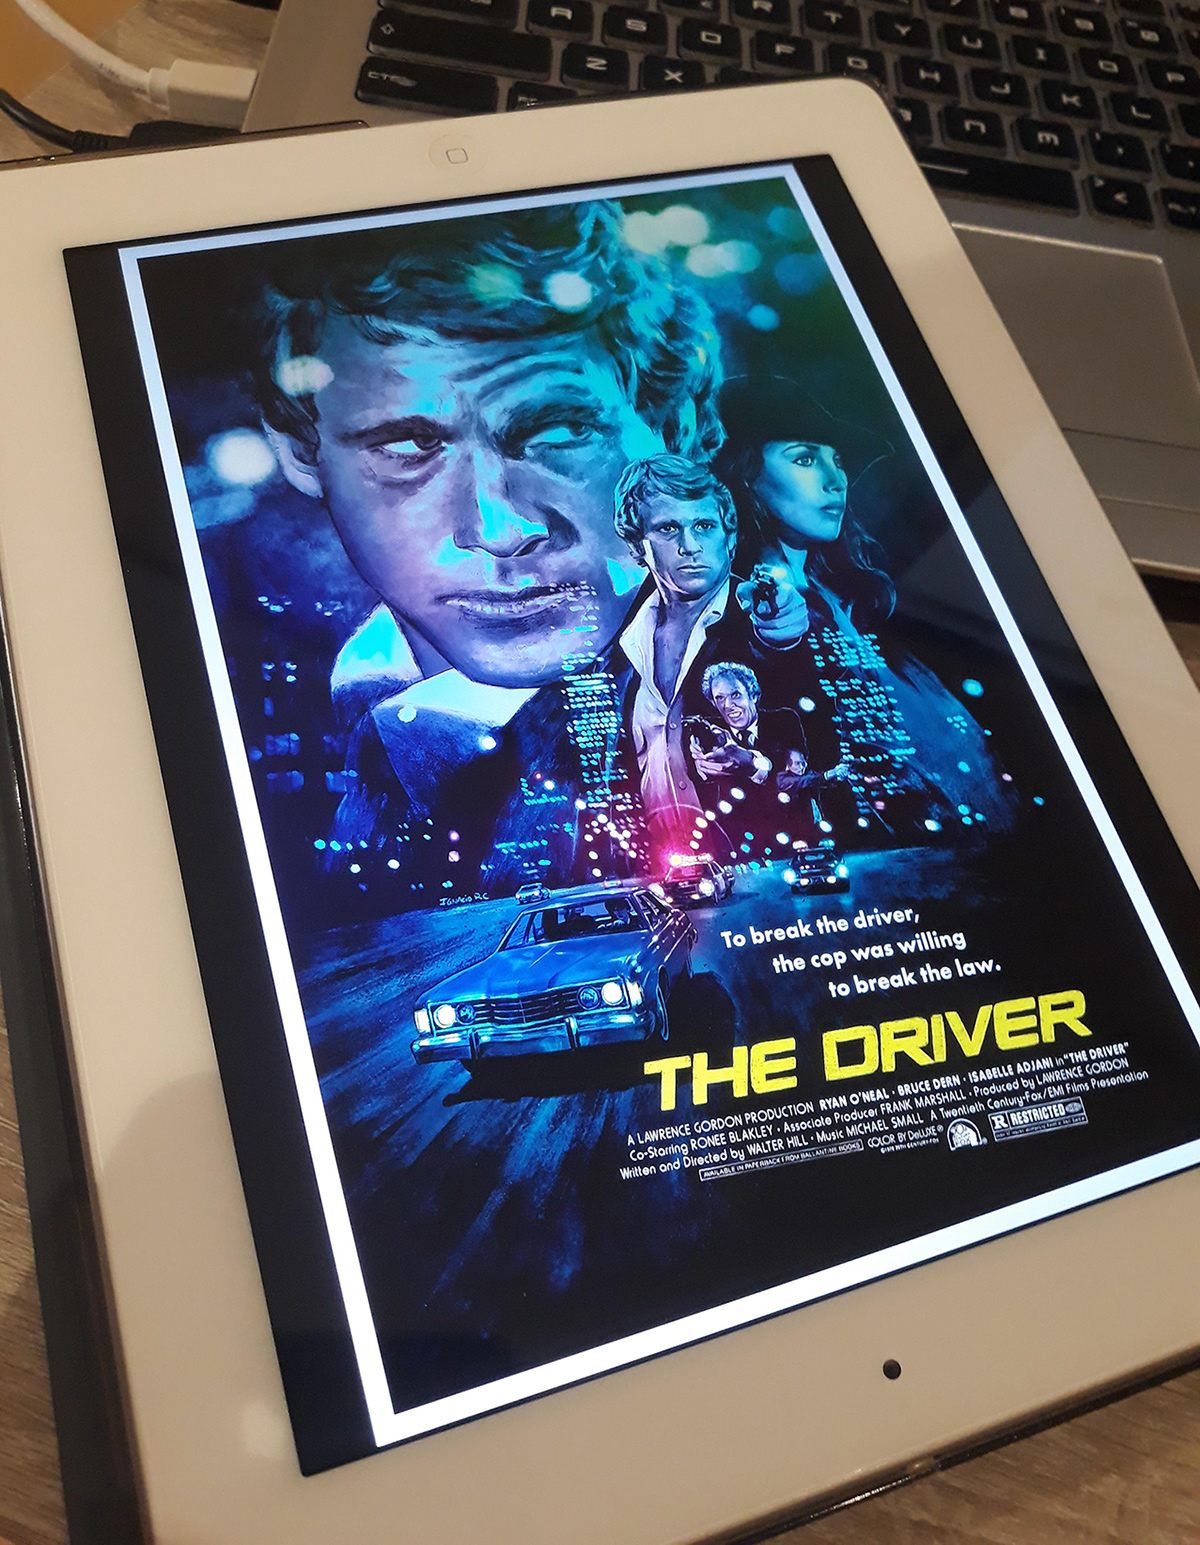 thedriver driver Walter hill ryan oneal Bruce dern movie poster